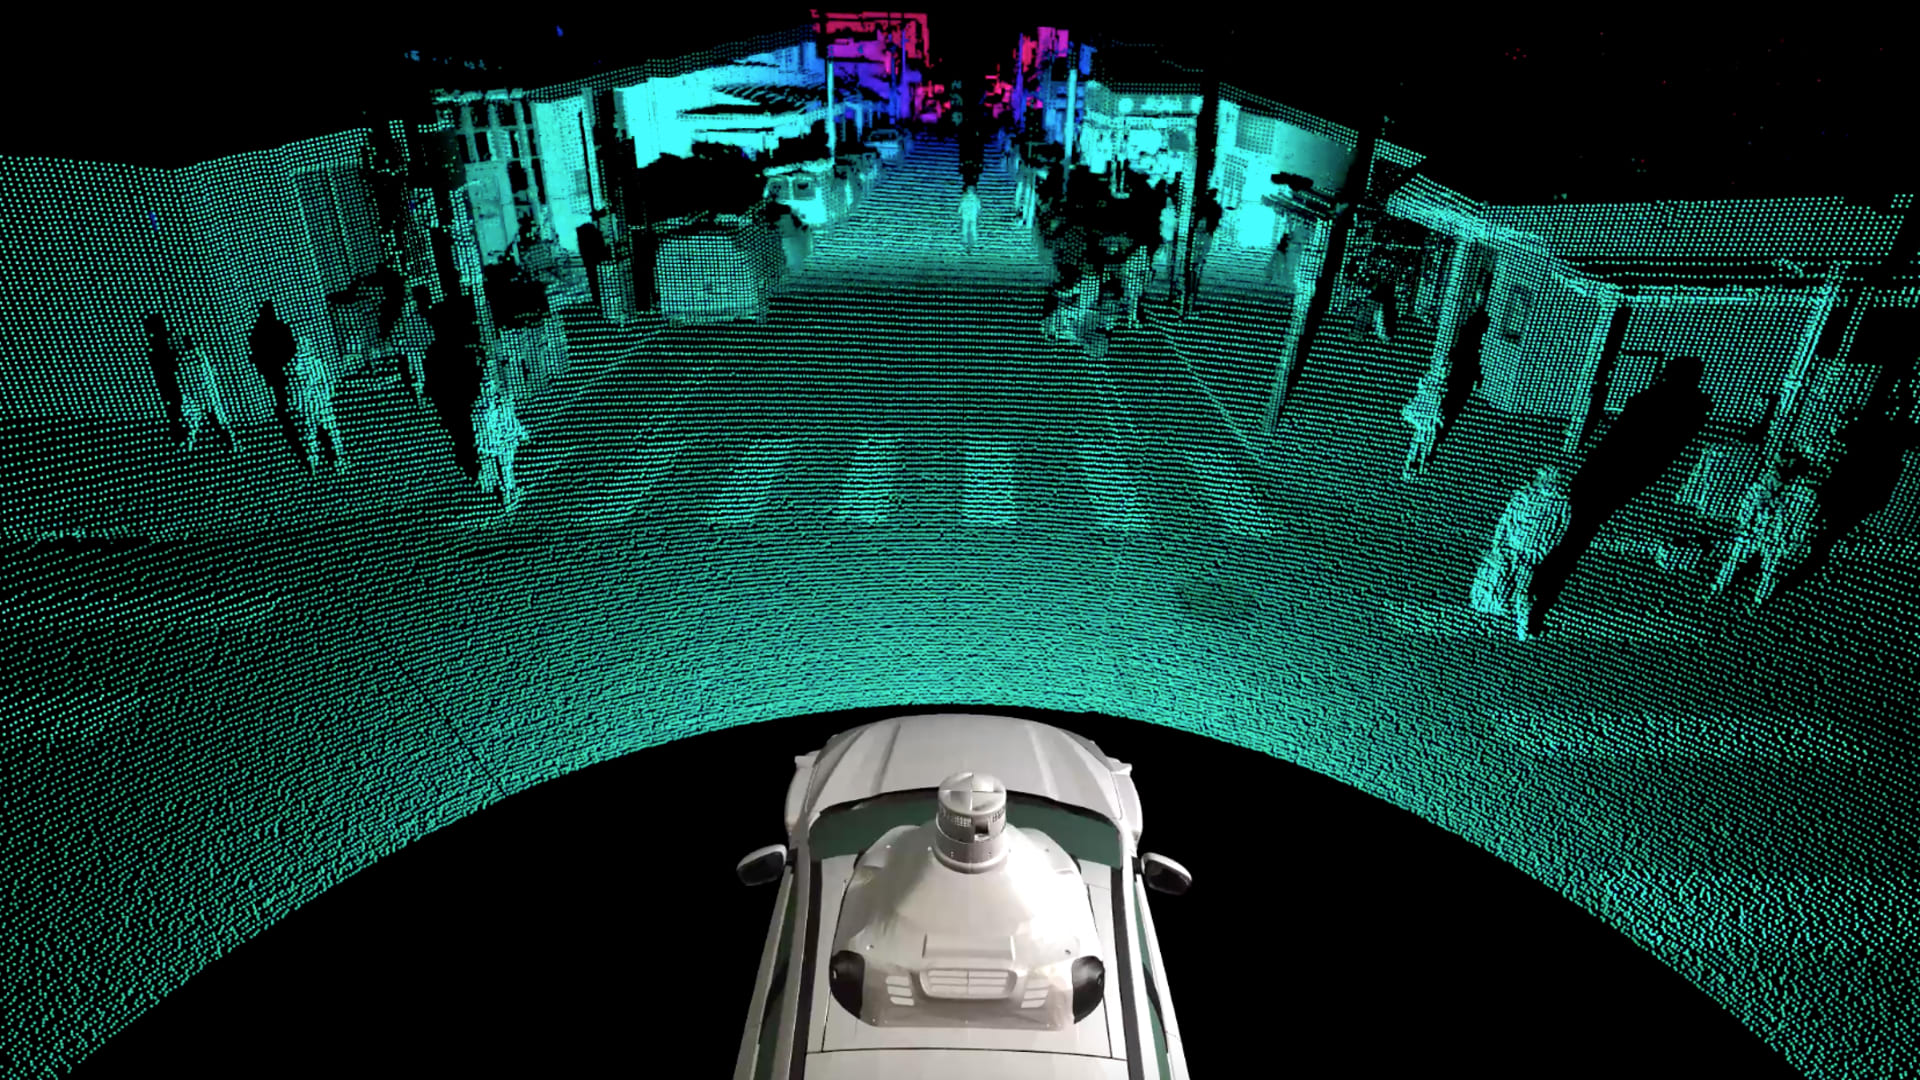 Lidar offers ultra-high resolution perception, providing the photorealistic imaging required to identify small objects for safe operation on complex city streets.